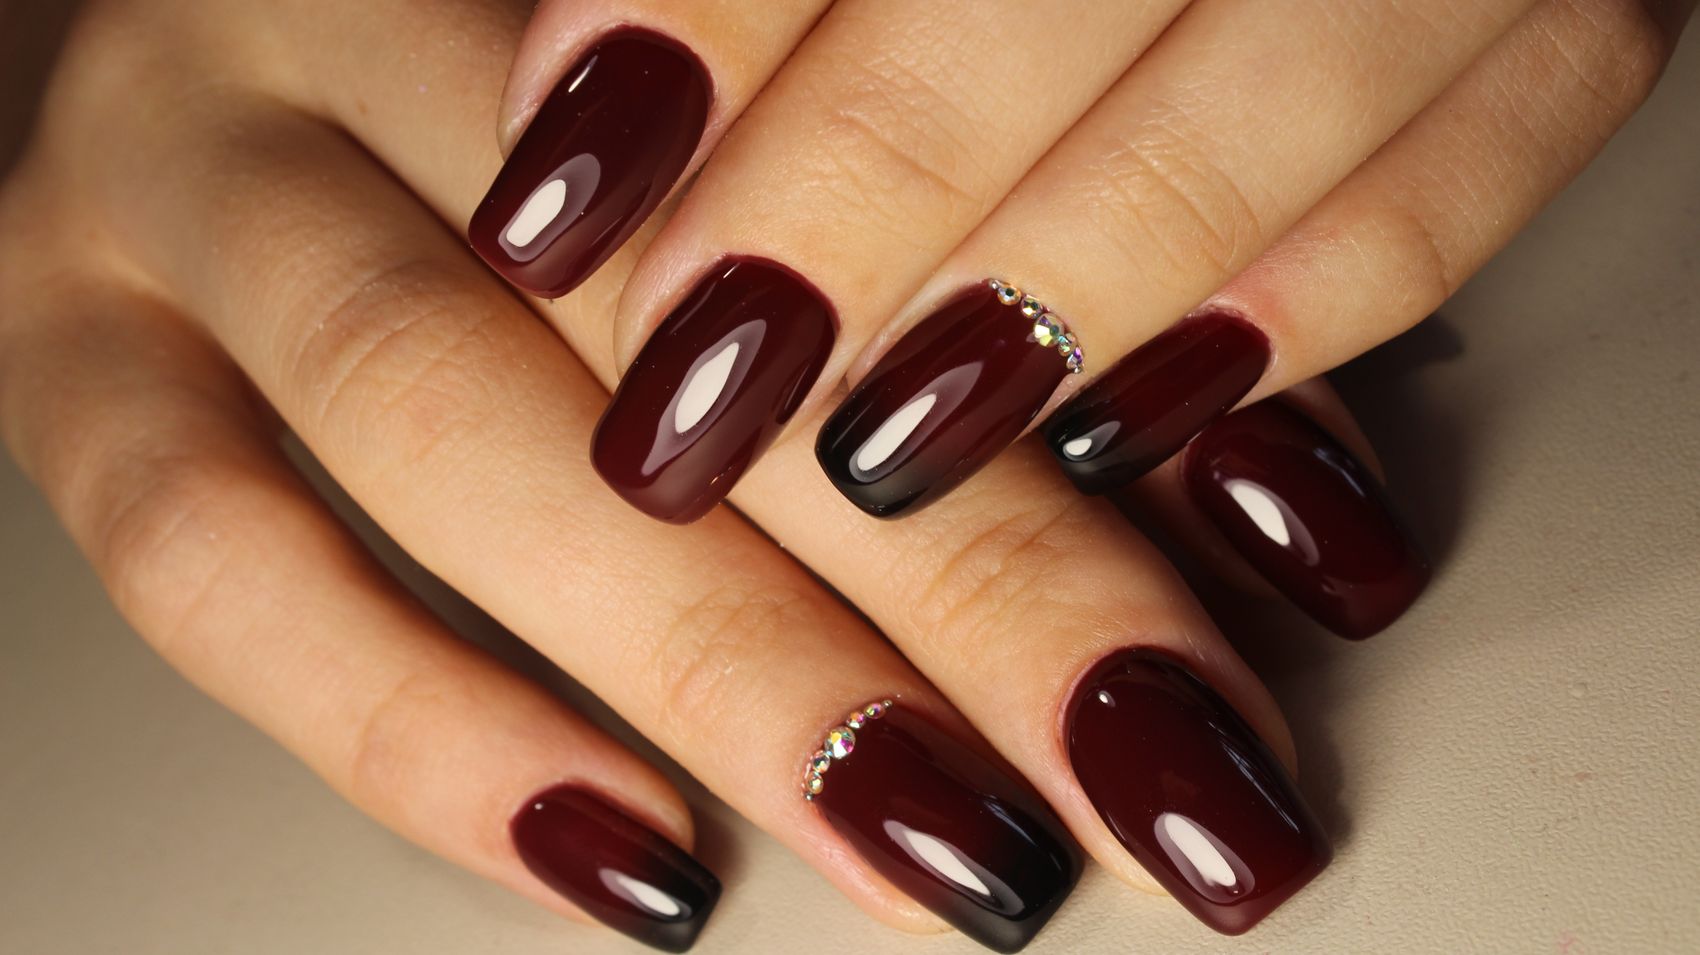 7. "The Most Popular Nail Colors of the Season" - wide 5